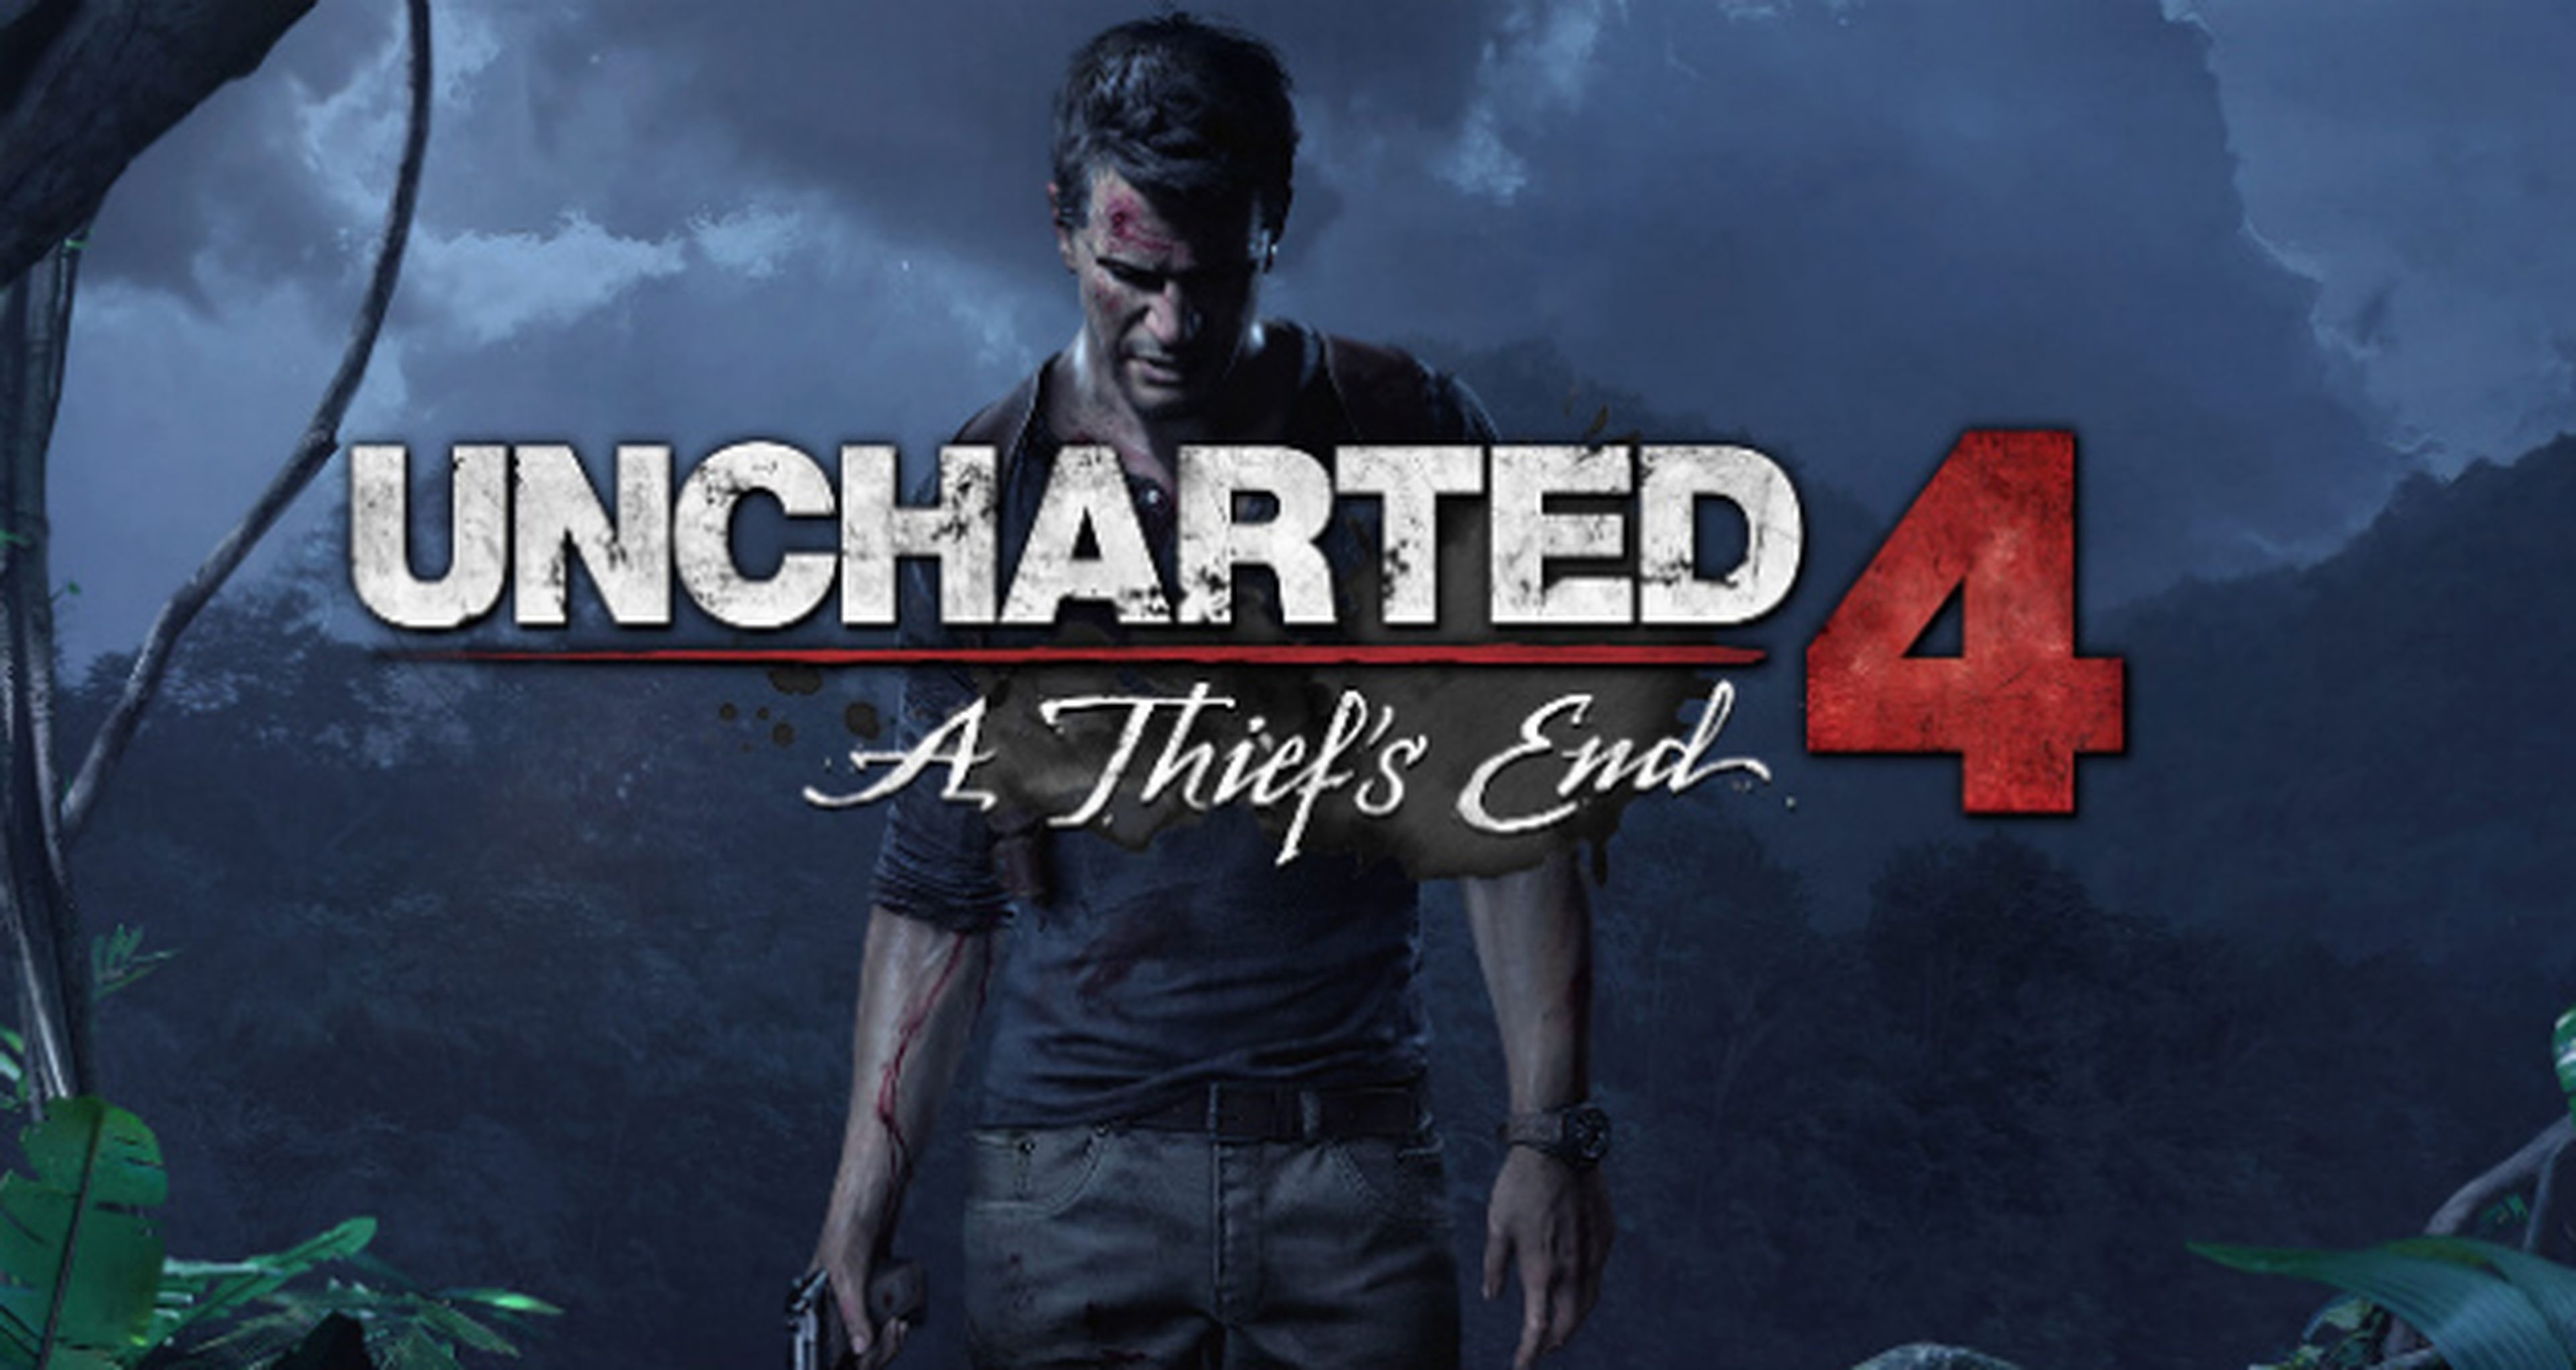 Madrid Games Week 2015: Uncharted The Nathan Drake Collection y Uncharted 4 en la feria